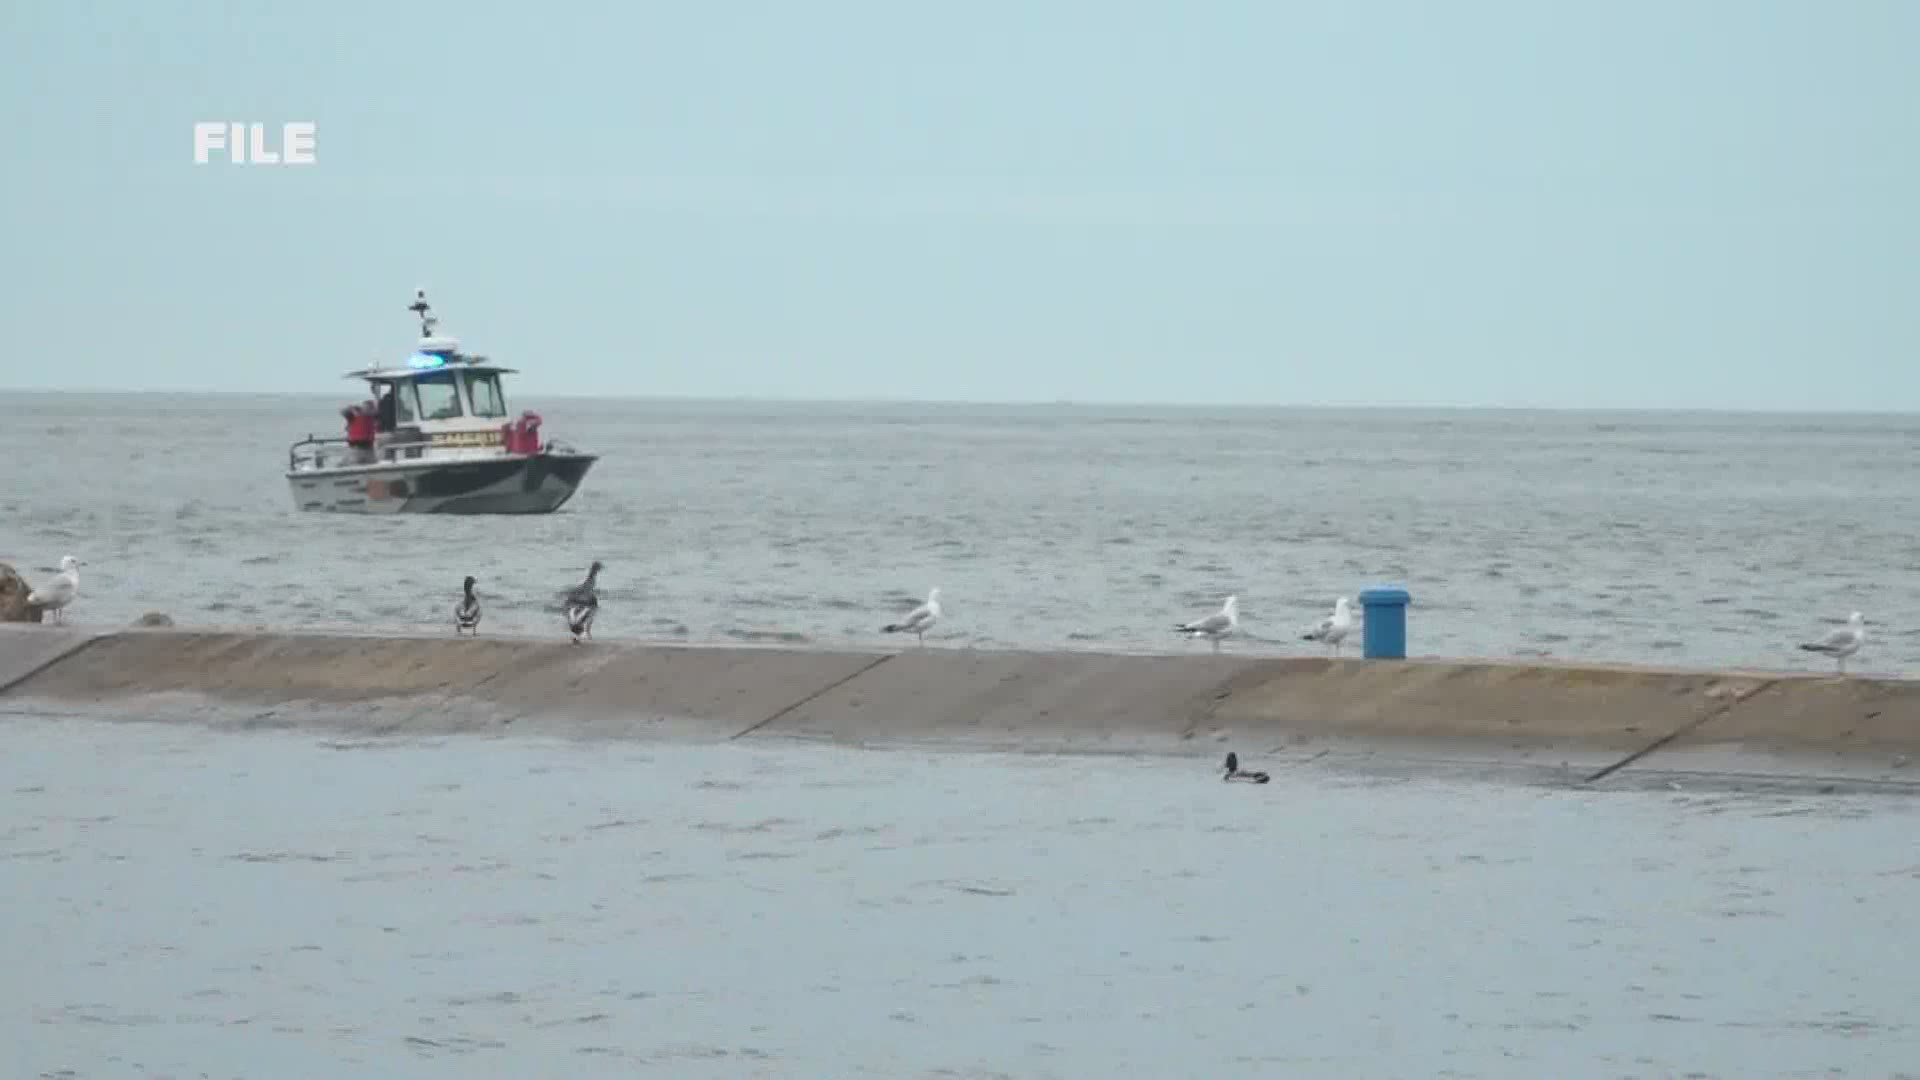 After two boys drowned in Lake Michigan over the weekend, some are saying there needs to be more safety precautions.